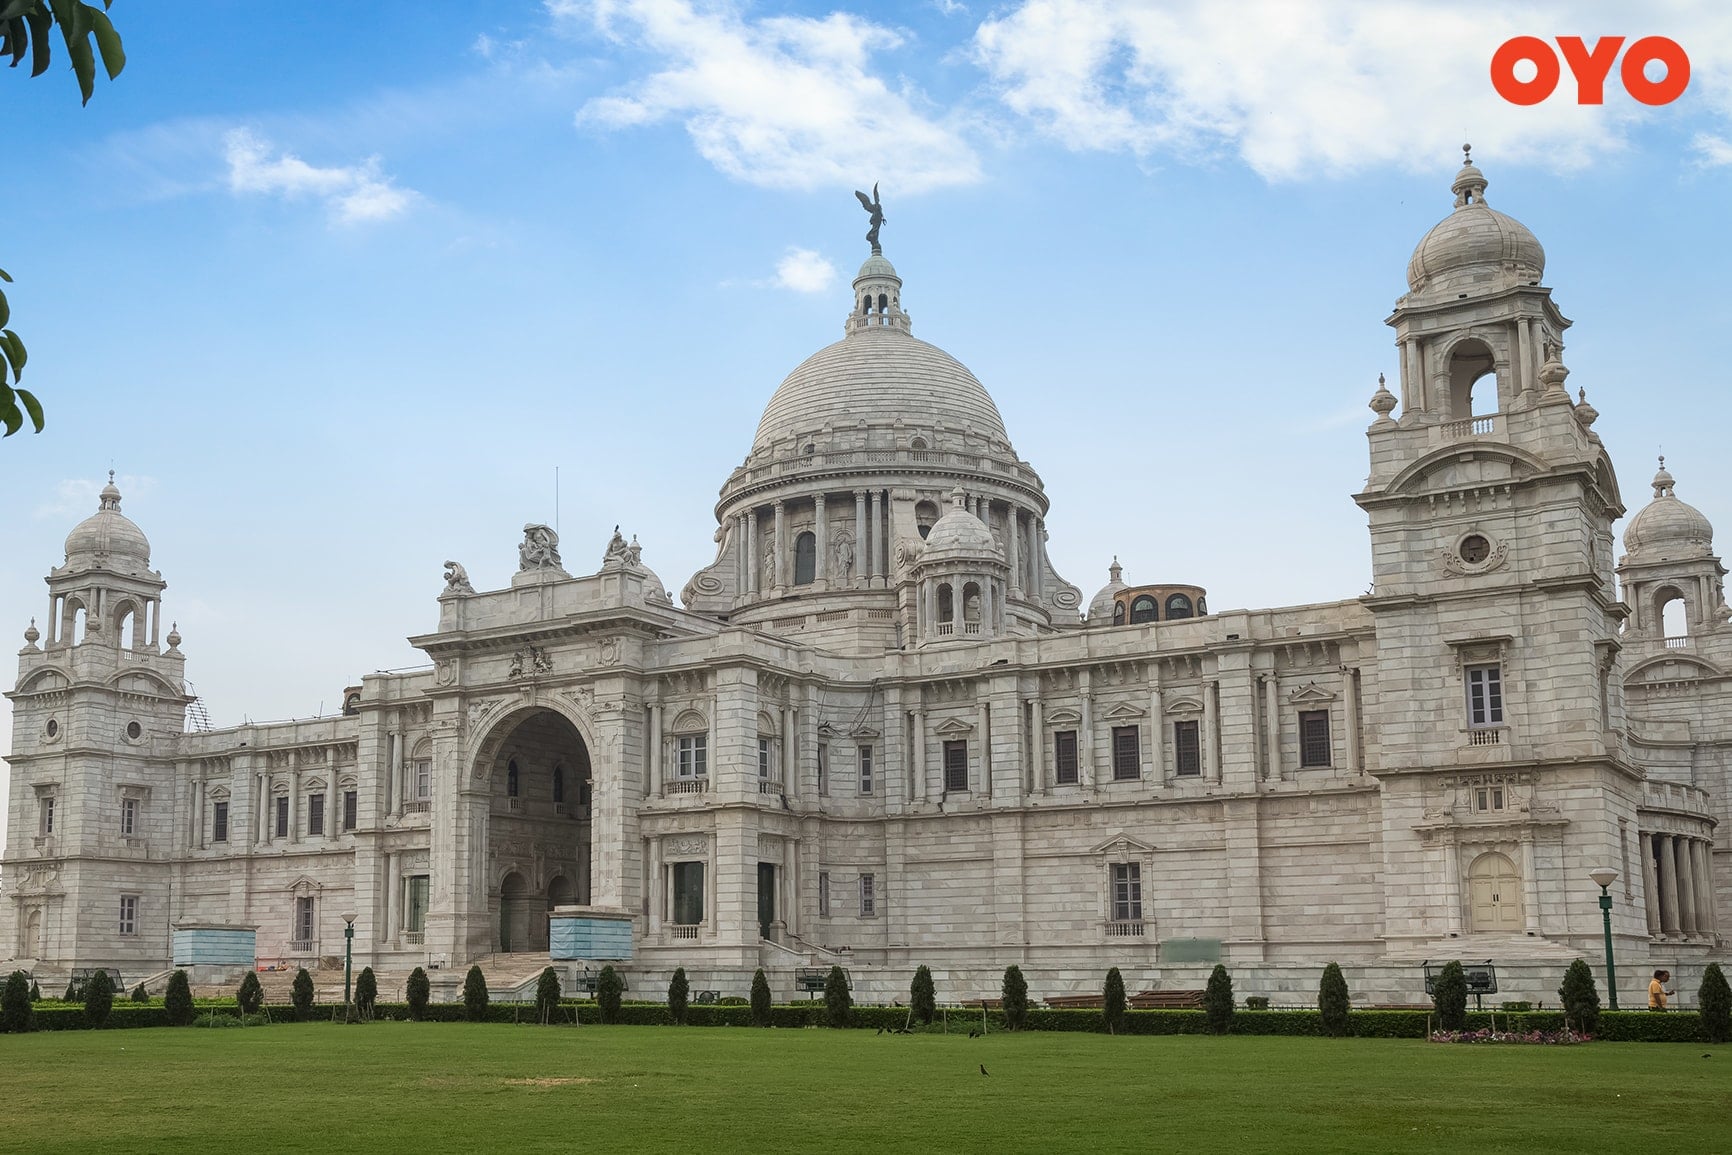 Victoria Memorial, Kolkata - one of the most famous historical monuments in India